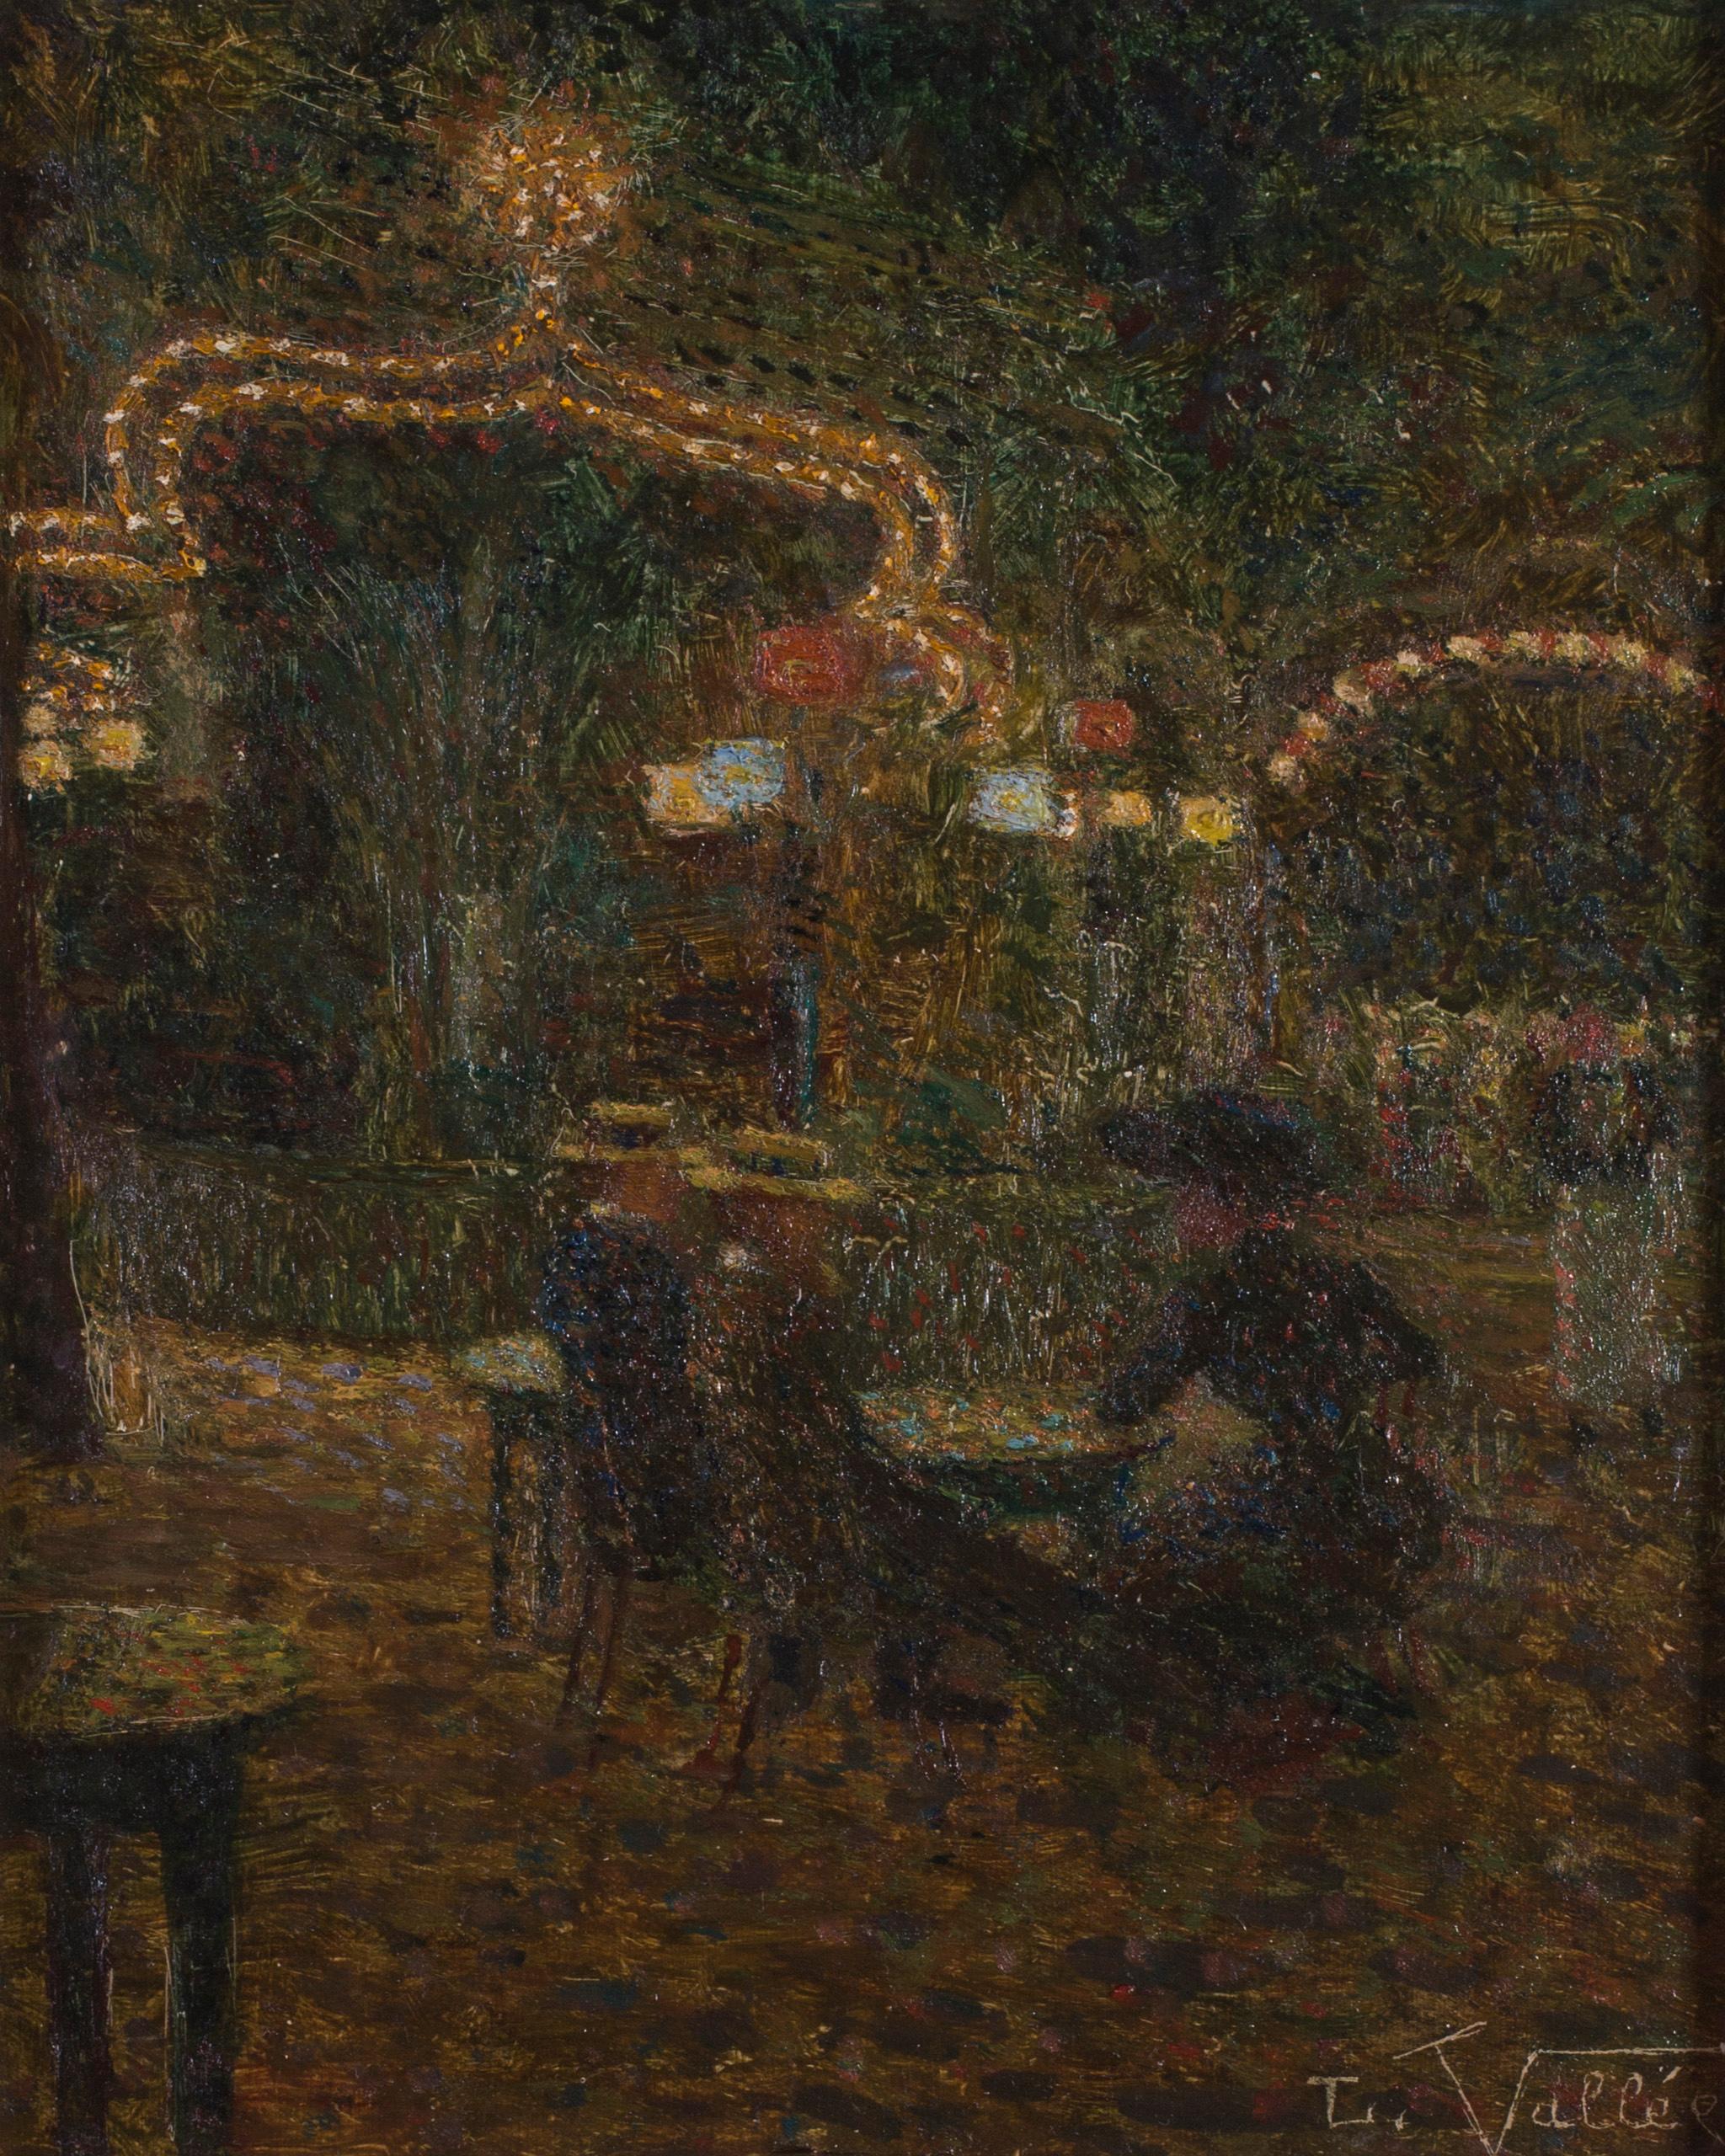 Ludovic Vallee (French 1864 – 1939)
Soiree a la guinguette
Signed ‘L Valle’ (lower right)
Oil on board
27 x 22 cm.

It has an inscription on the reverse dedicated to ‘Mr and Mrs Luisette on the occasion of their marriage’  25th February 1933.  
Le